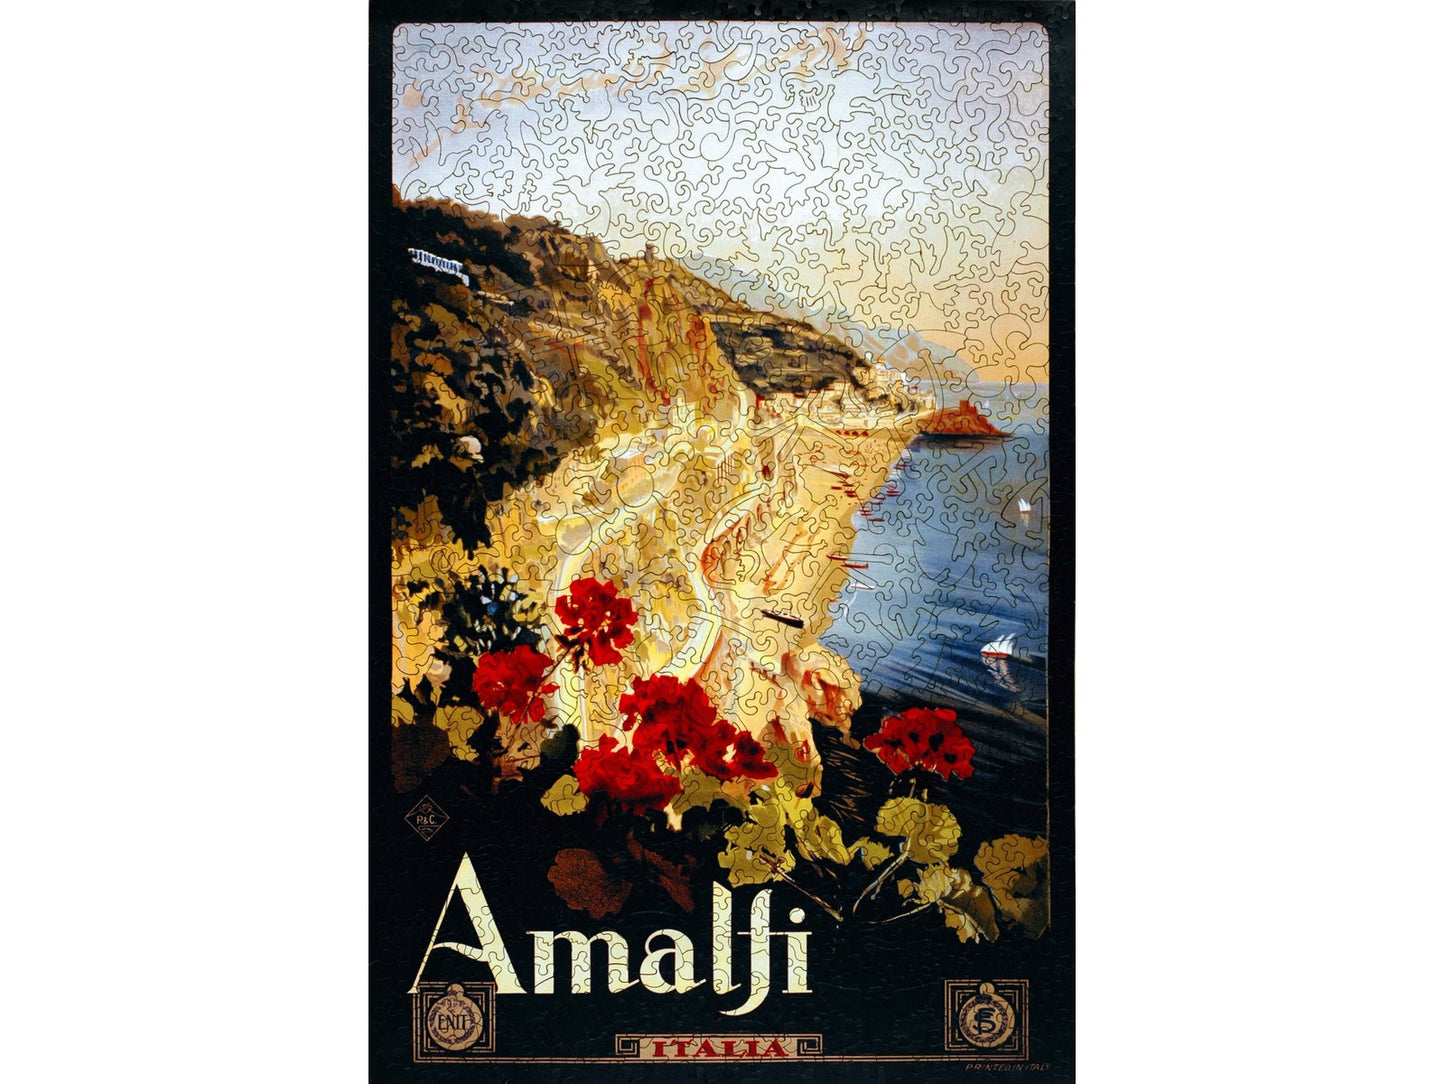 The front of the puzzle, Amalfi, showing a landscape of the Italian coastline with red flowers in the foreground.